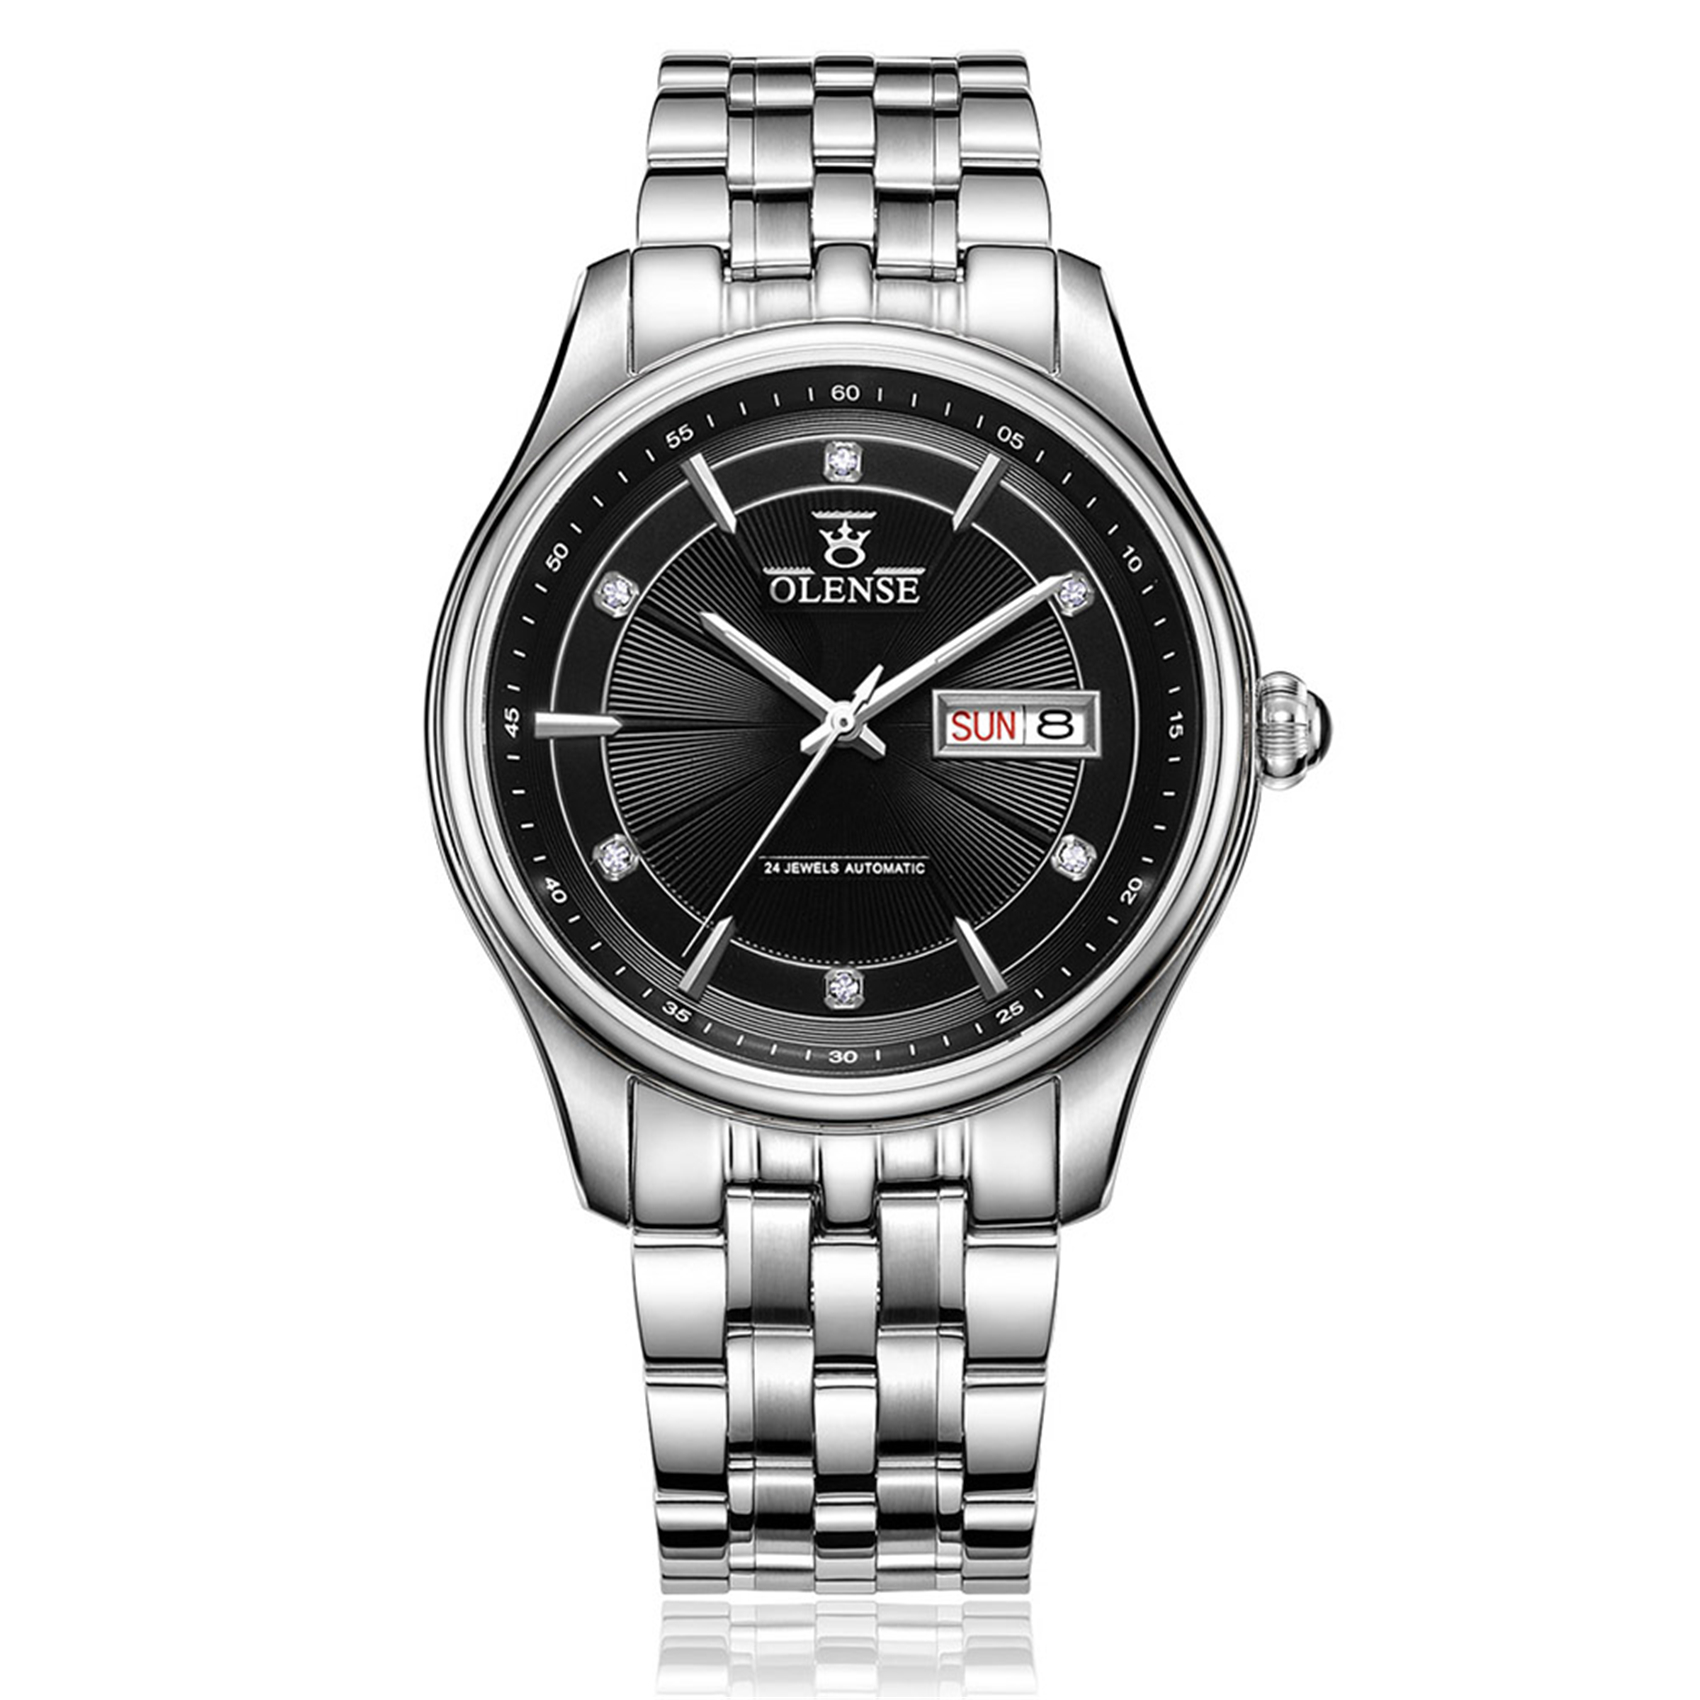 OLENSE - Dress Watch for Men, Automatic Mechanical, Diamond, Stainless Steel, 41mm, Silver & Black